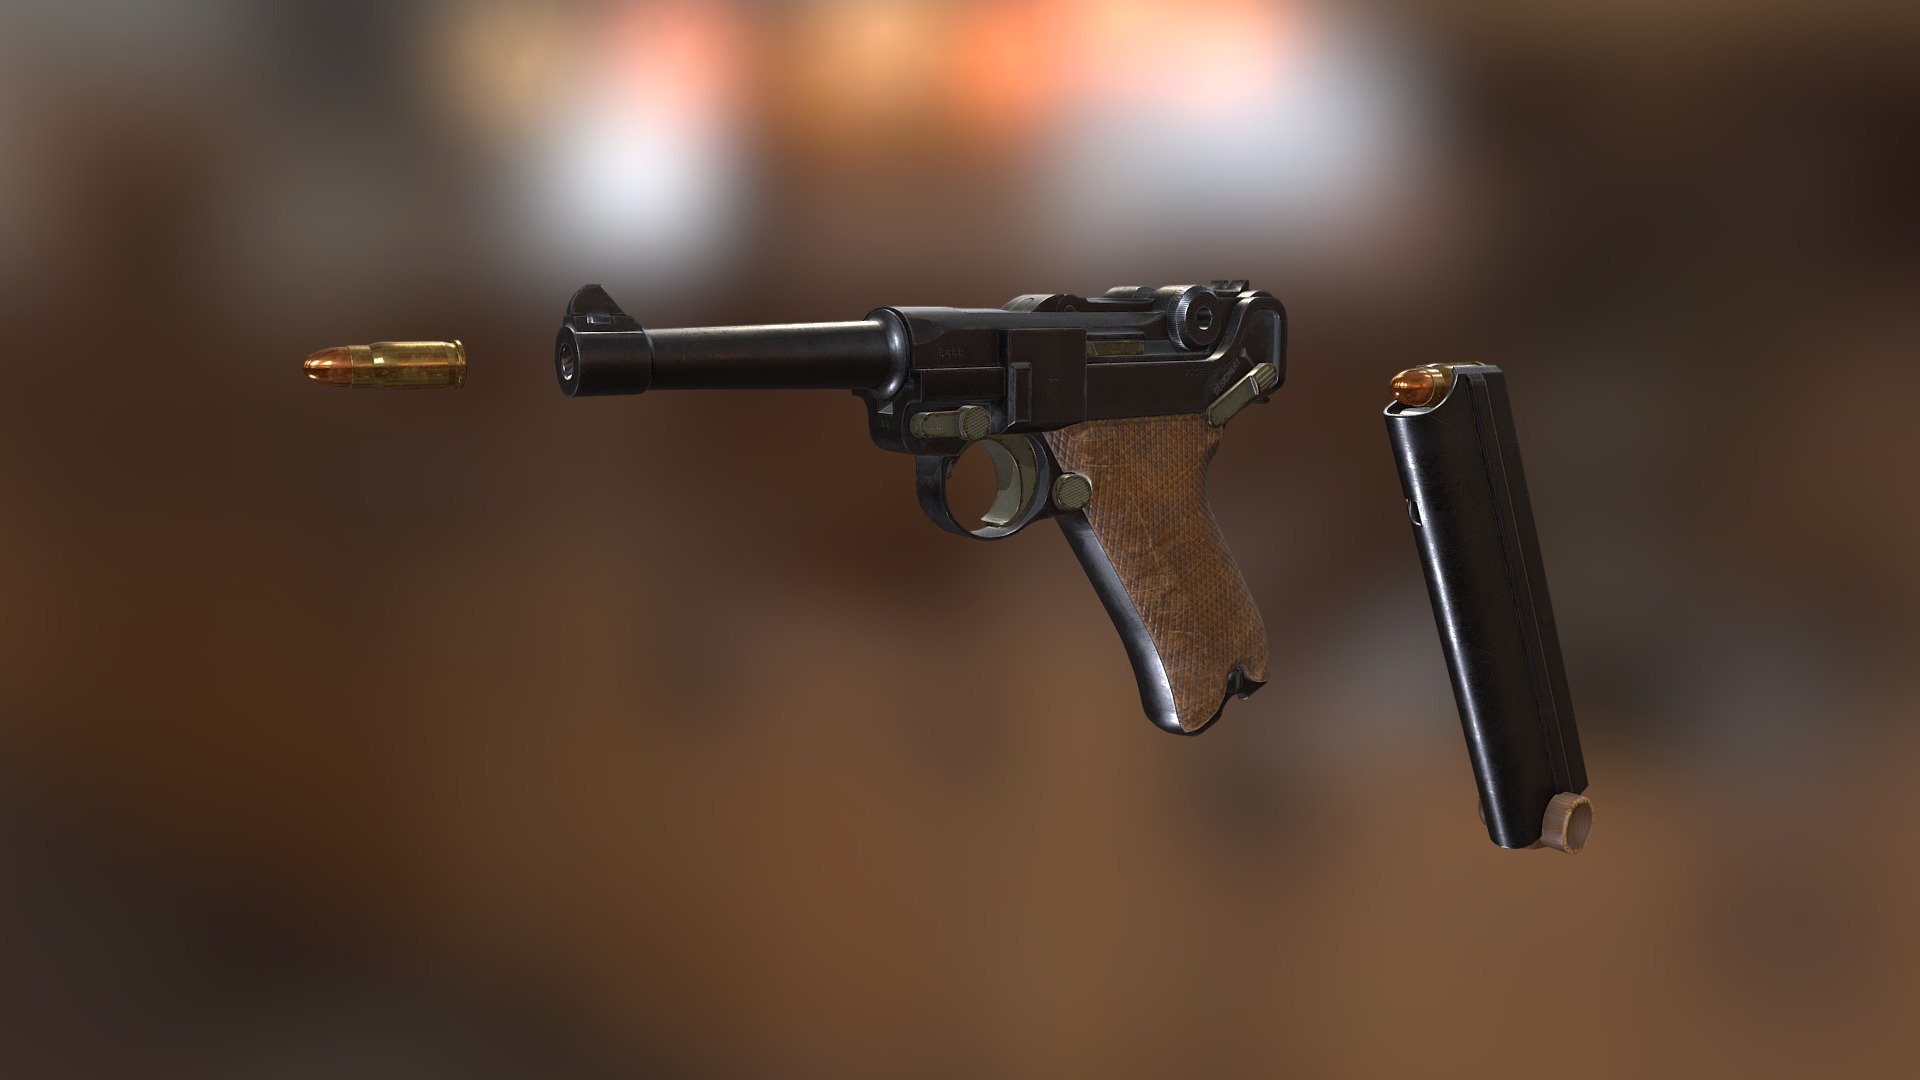 Luger P08 based on real life references. Modeled in Blender and textured in Substance 3D Painter 3d model